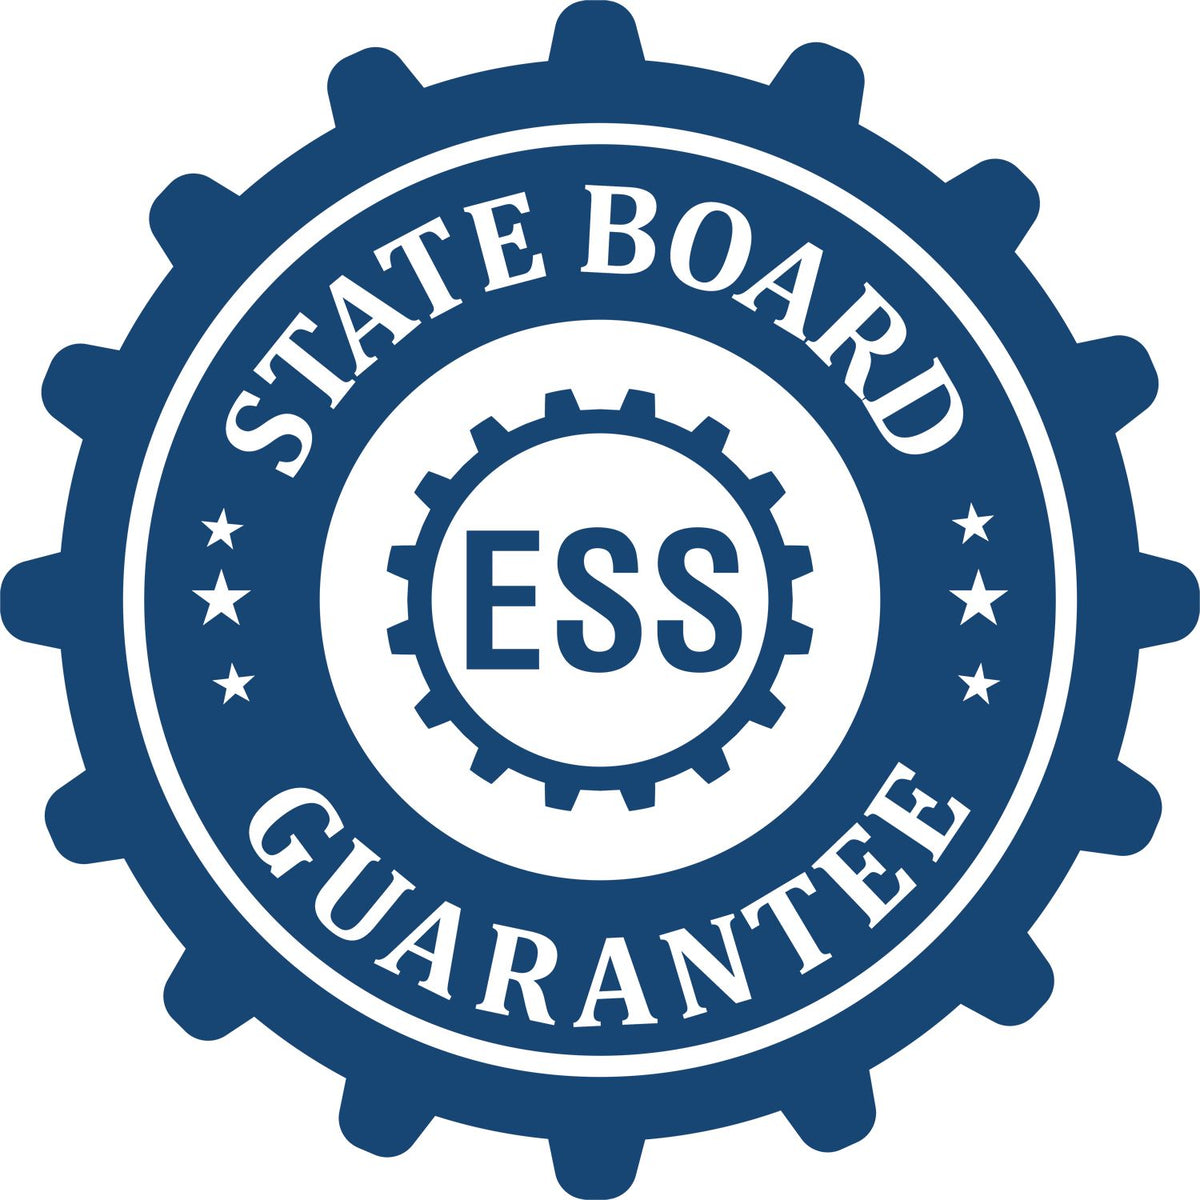 An emblem in a gear shape illustrating a state board guarantee for the Delaware Desk Architect Embossing Seal product.